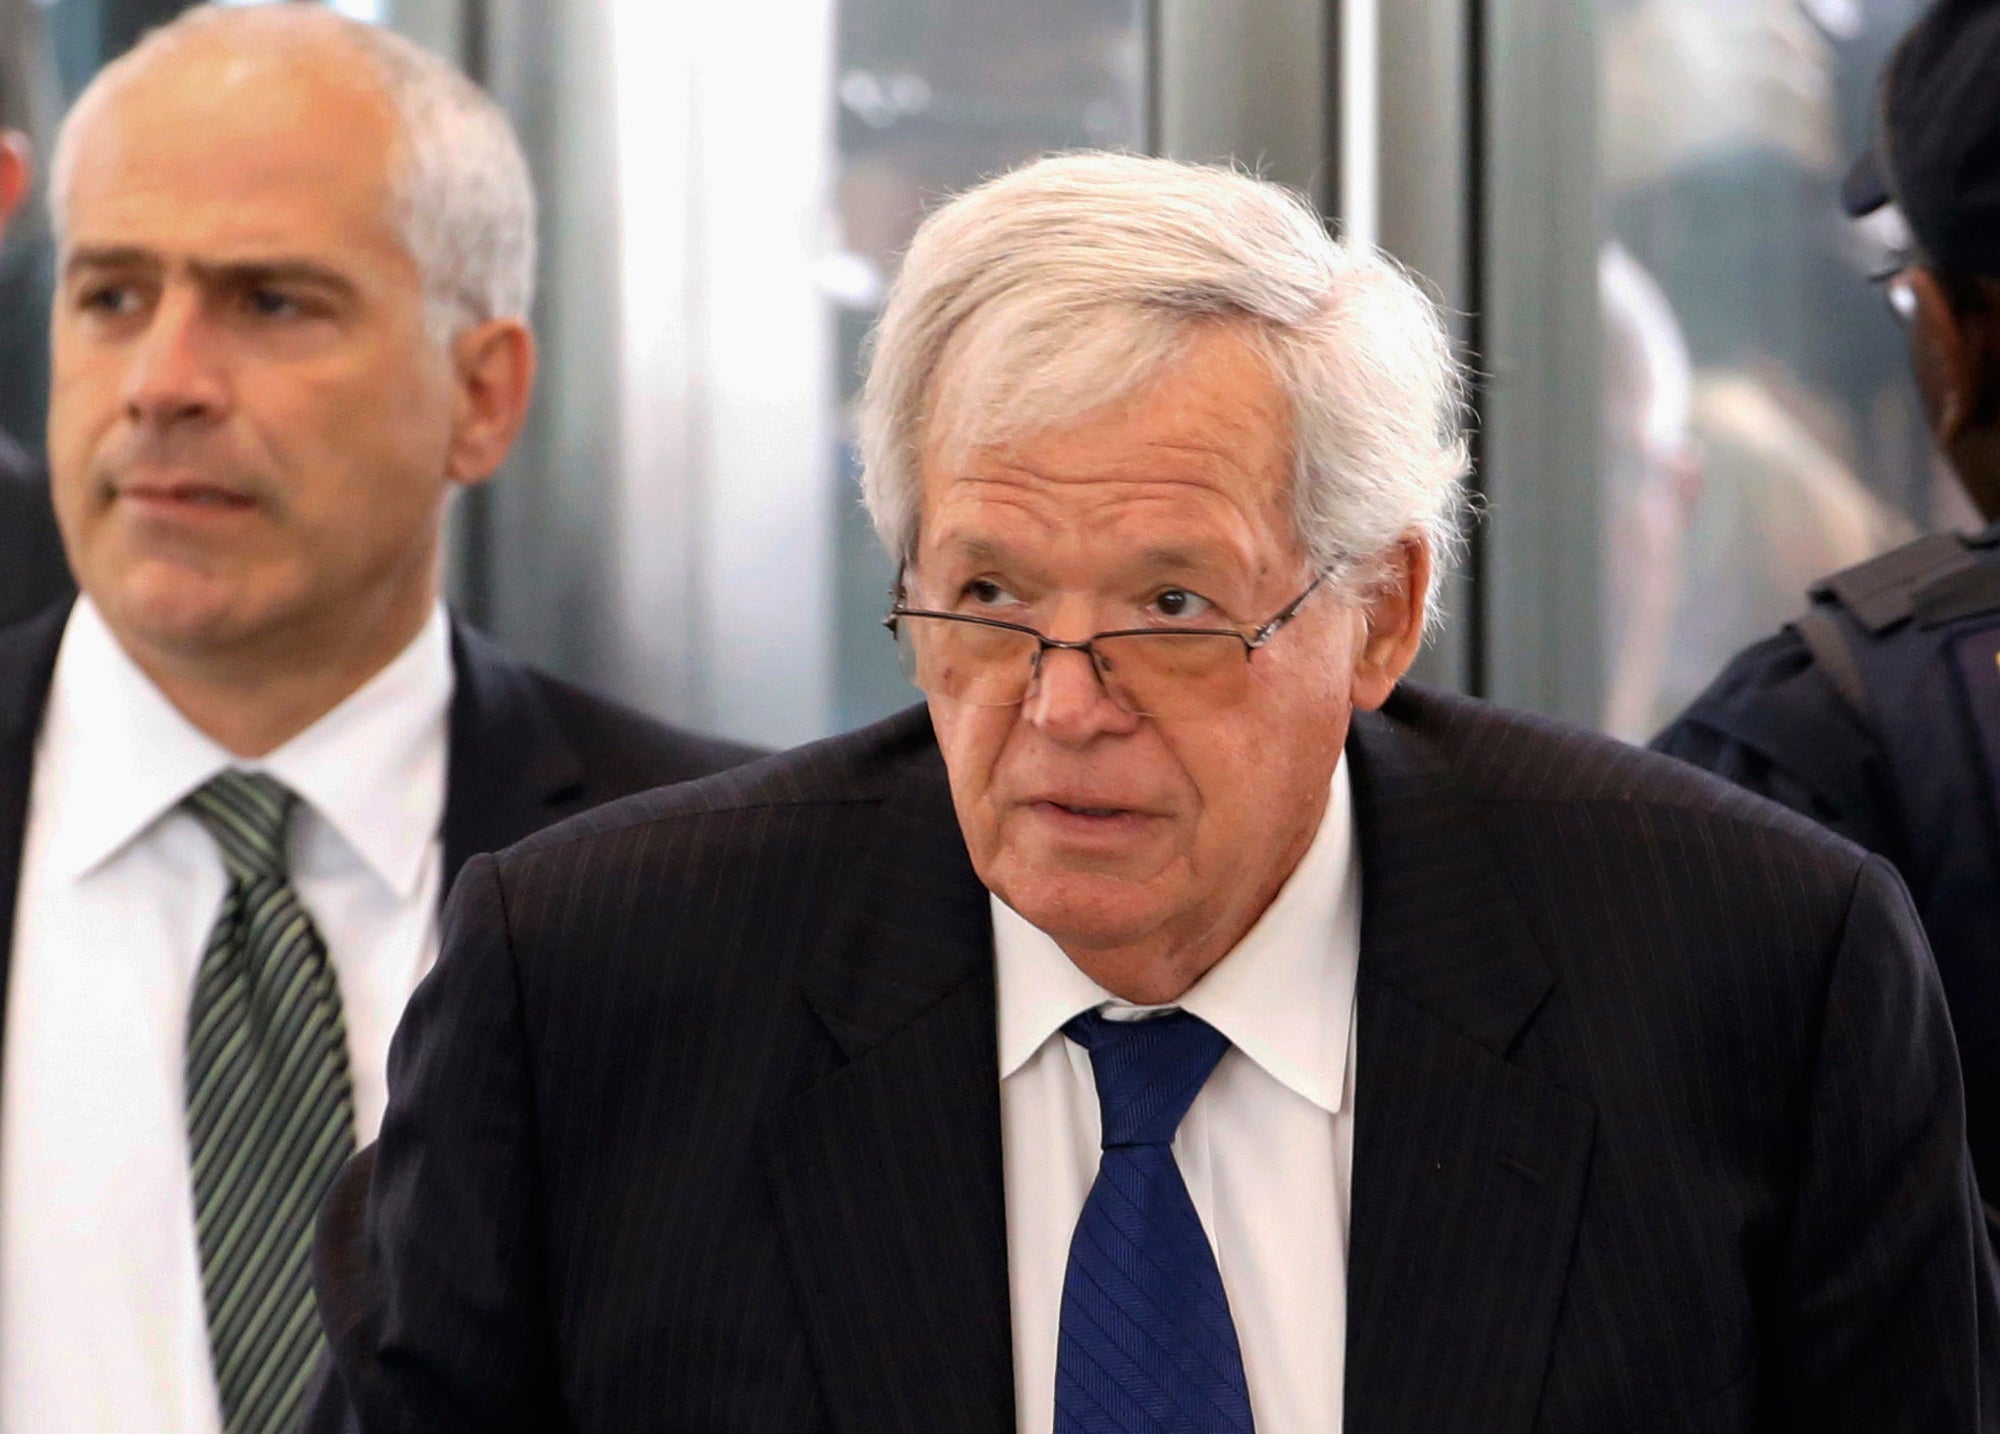 Mr Hastert's lawyers have requested he serve probation AP